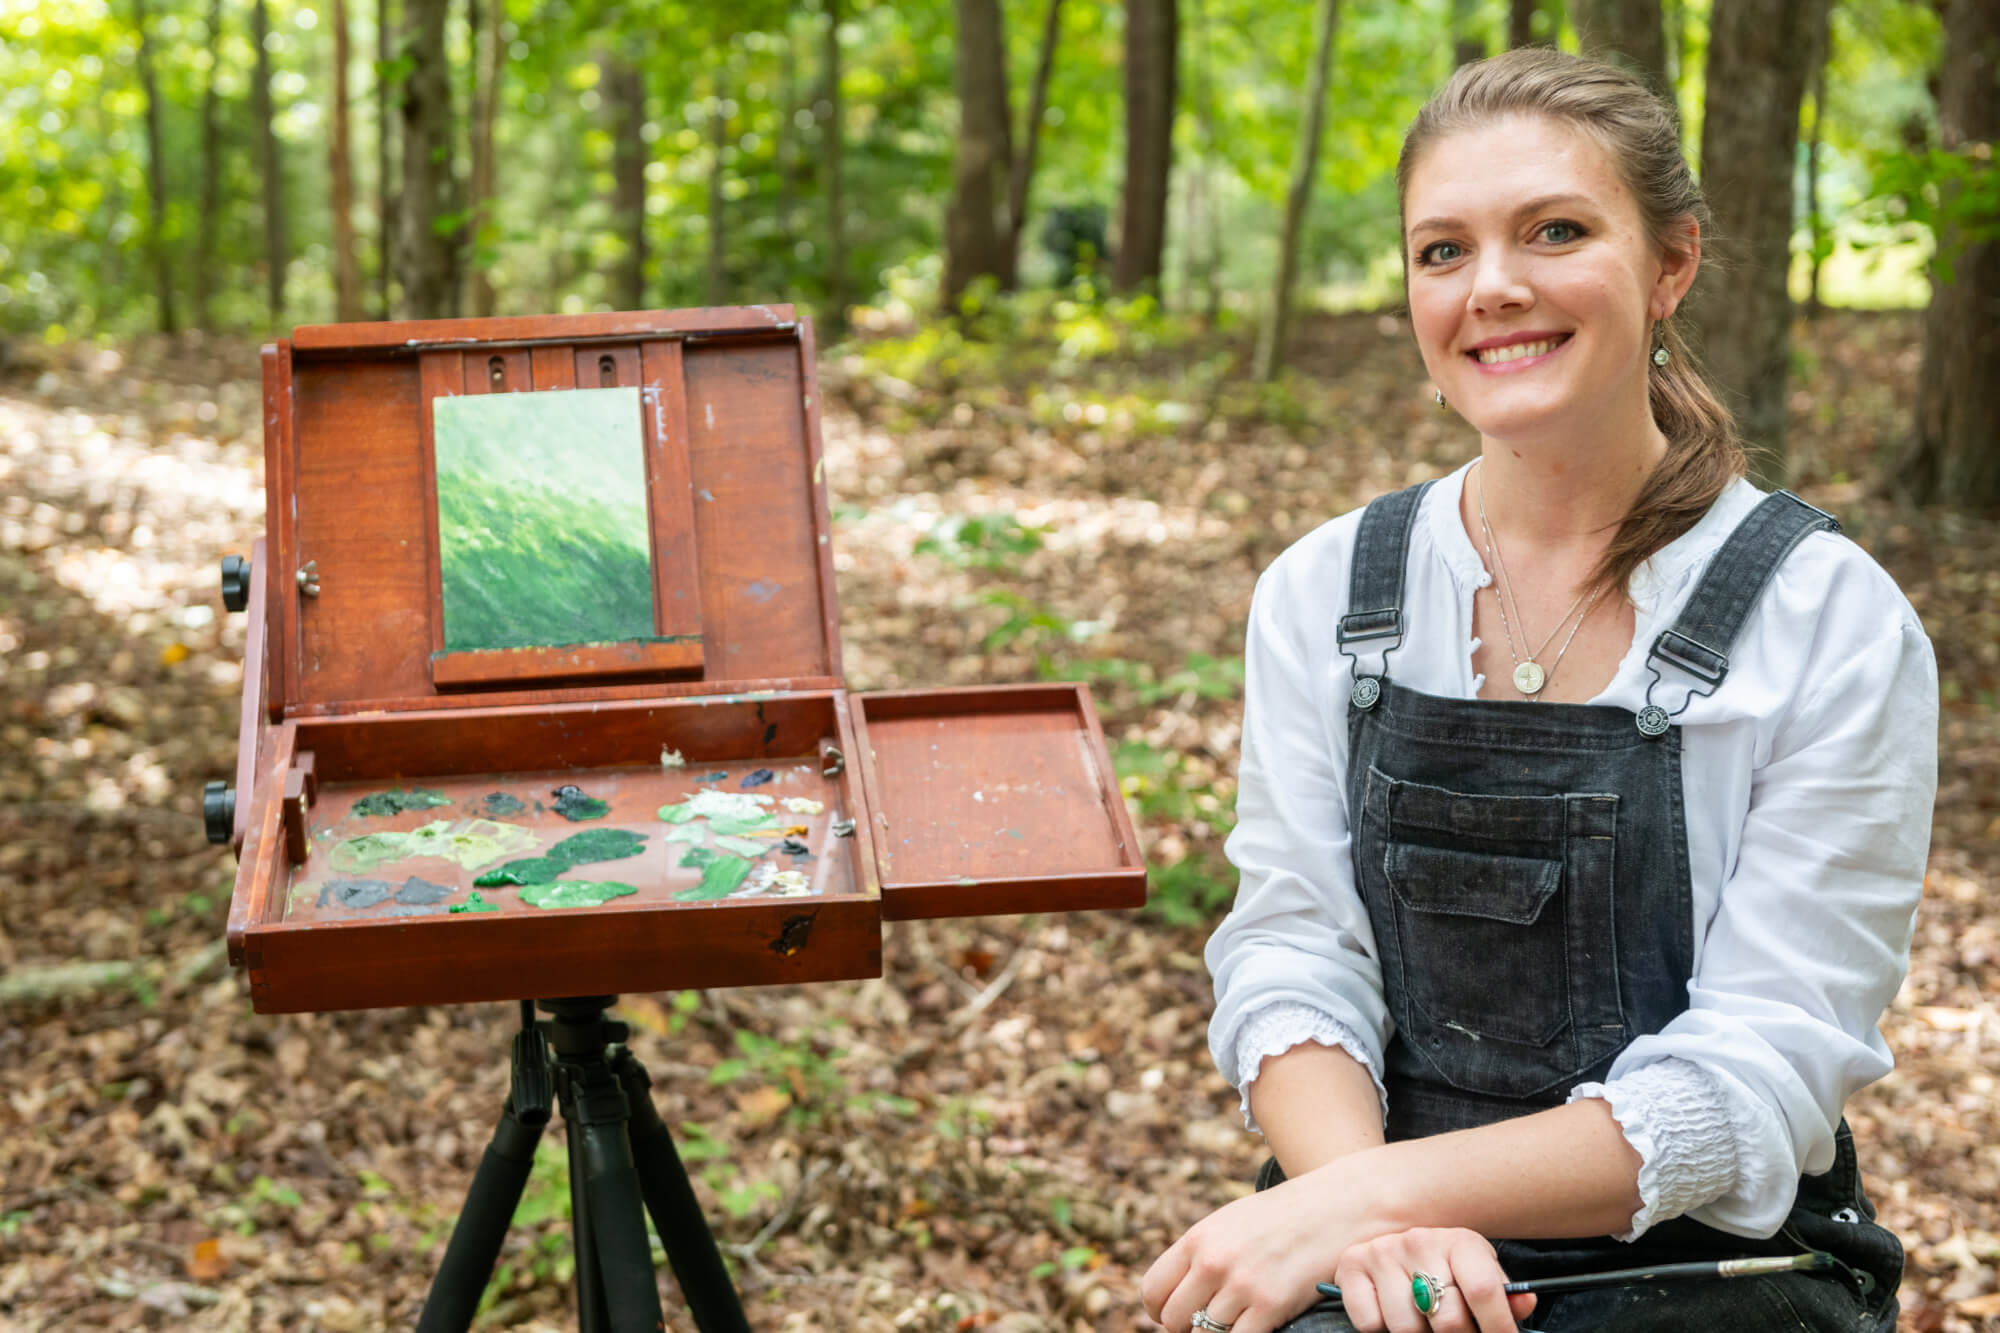 courtney hopkins with her painting easel outside